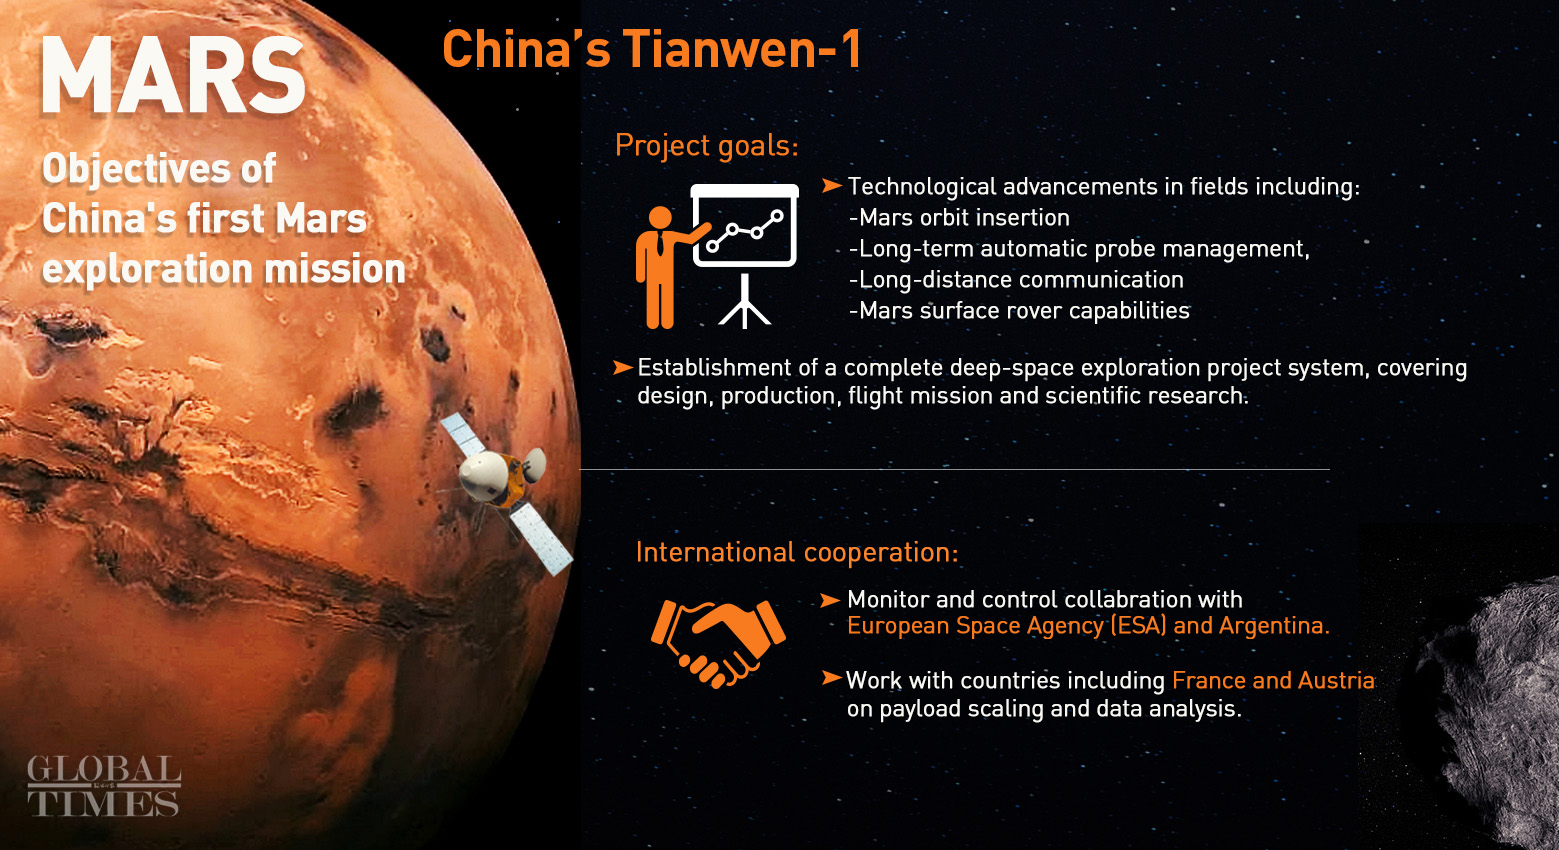 Tianwen-1 Mars orbiter and rover Objective - Globaltimes 20200723.jpg